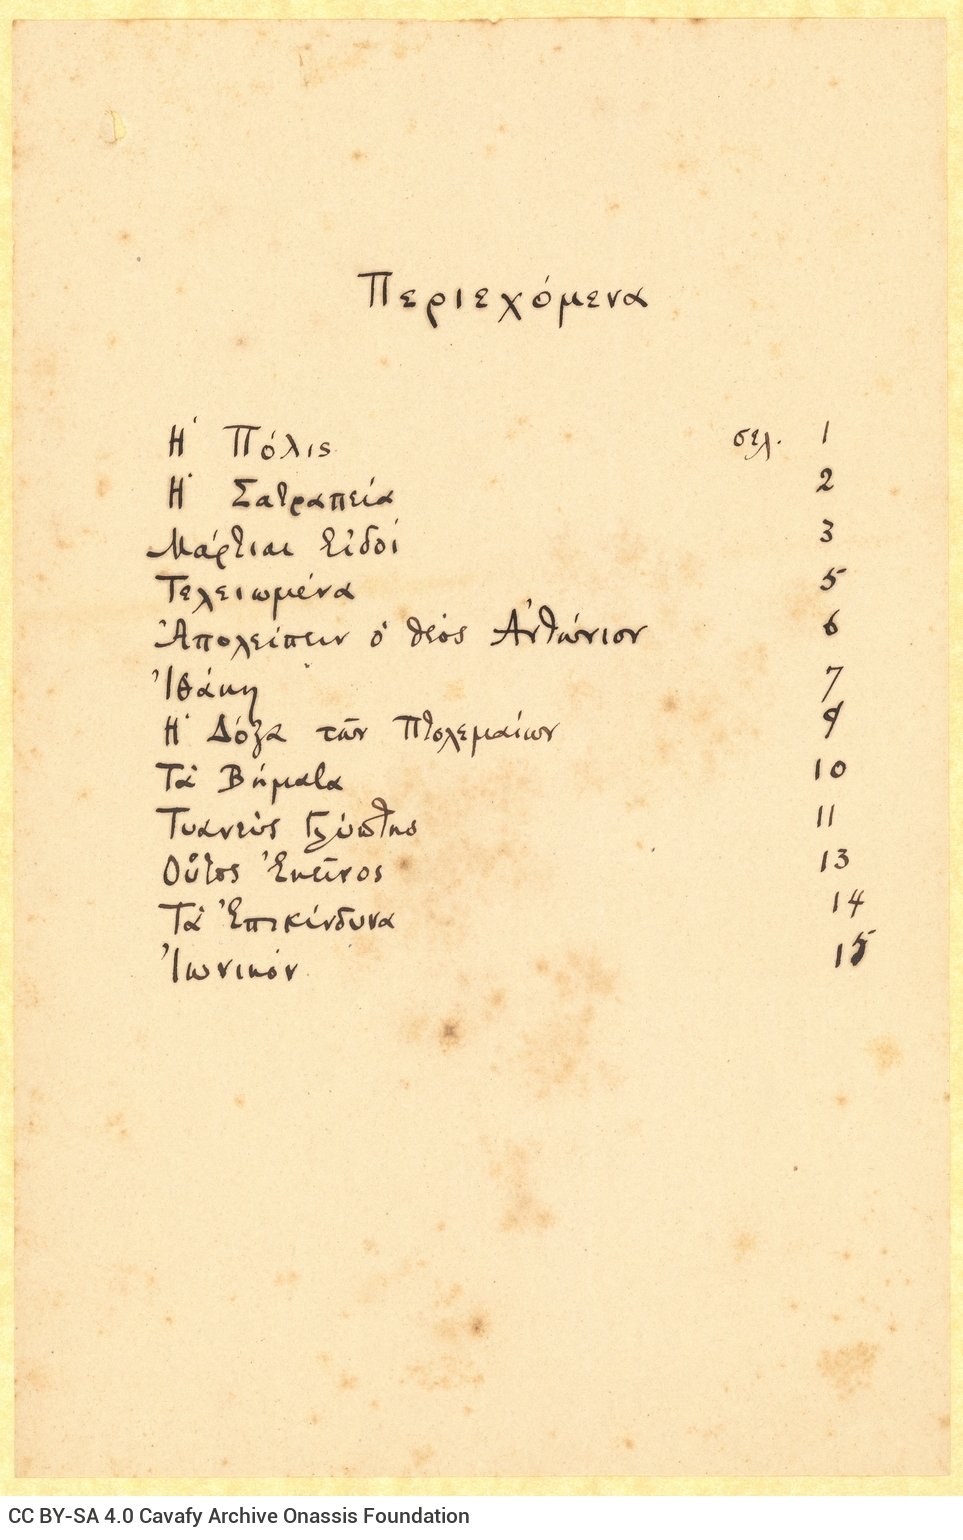 Handwritten table of content on one side of a sheet, comprising titles of poems by Cavafy and page numbers. It is probably